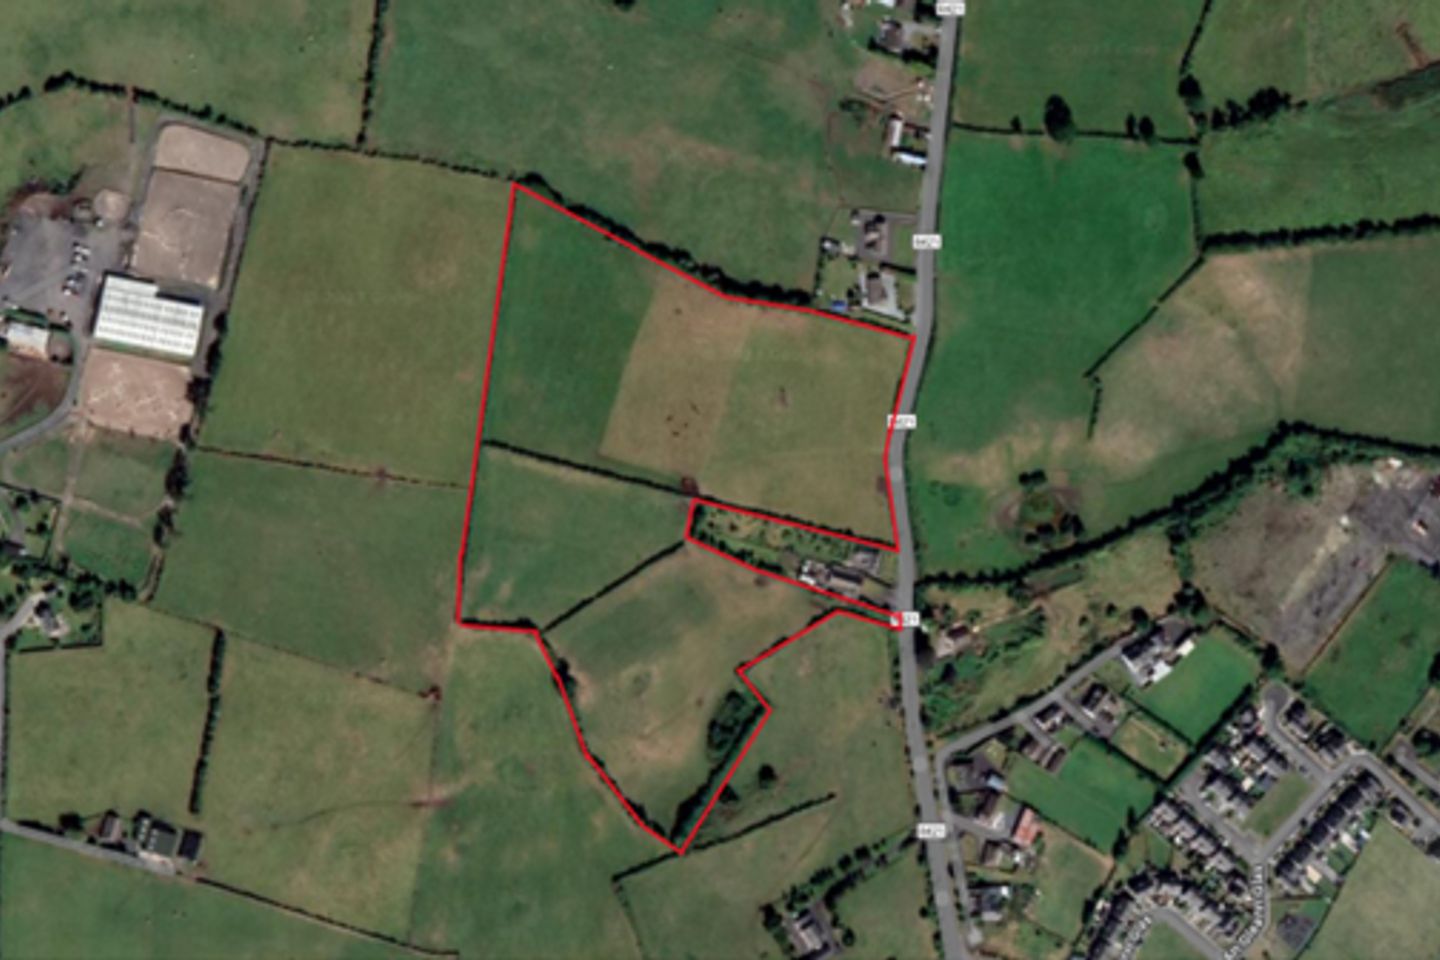 Whitepark, Approx. 6.29 Hectares / 15.54 Acres, Roscrea, Co. Tipperary